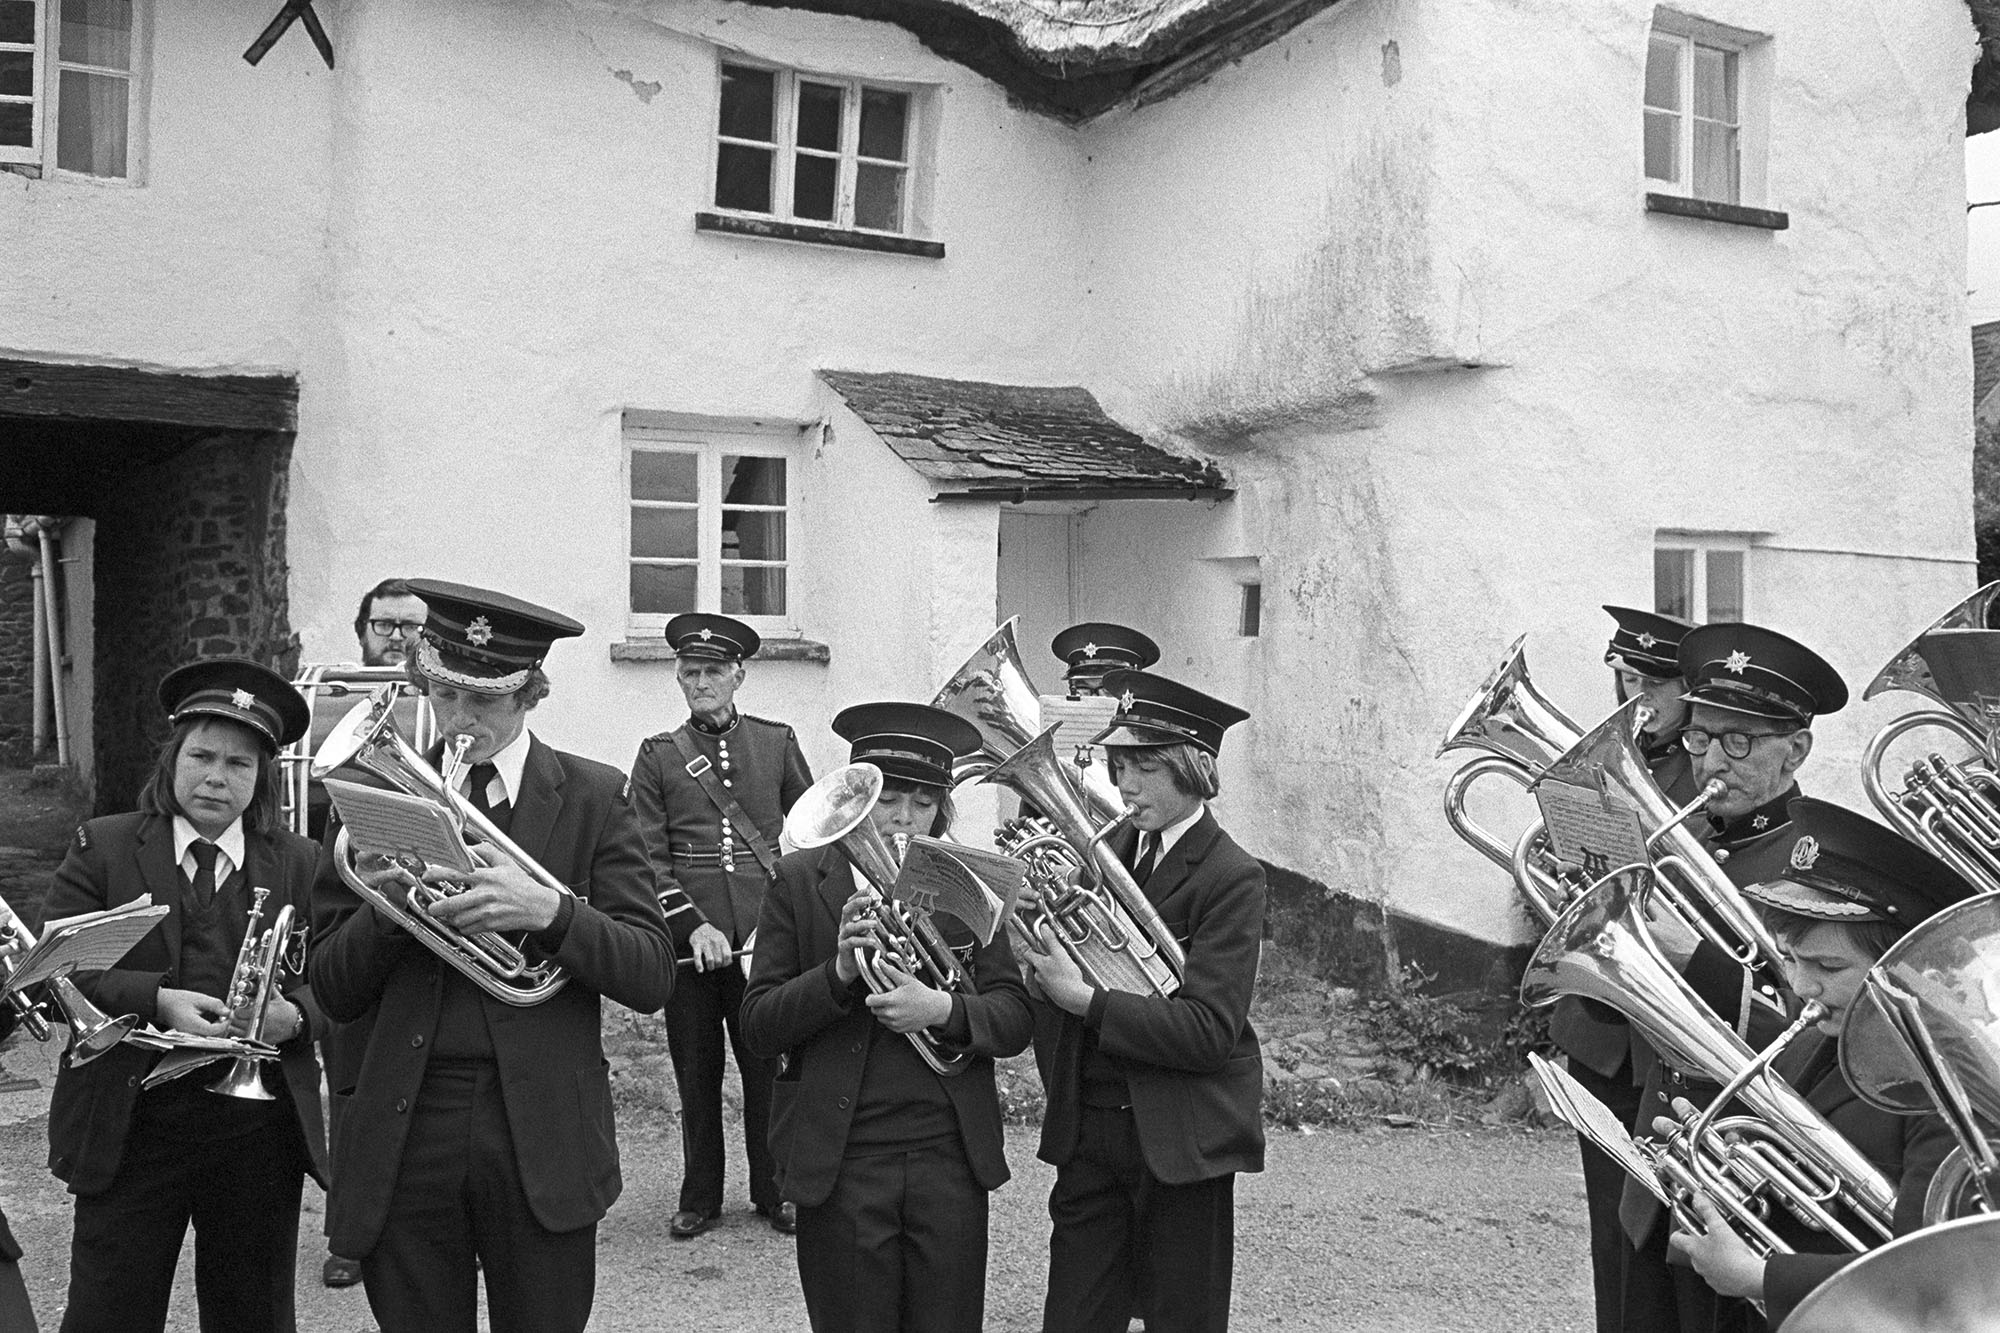 Hatherleigh Silver Band playing outside the Duke of York pub by James Ravilious